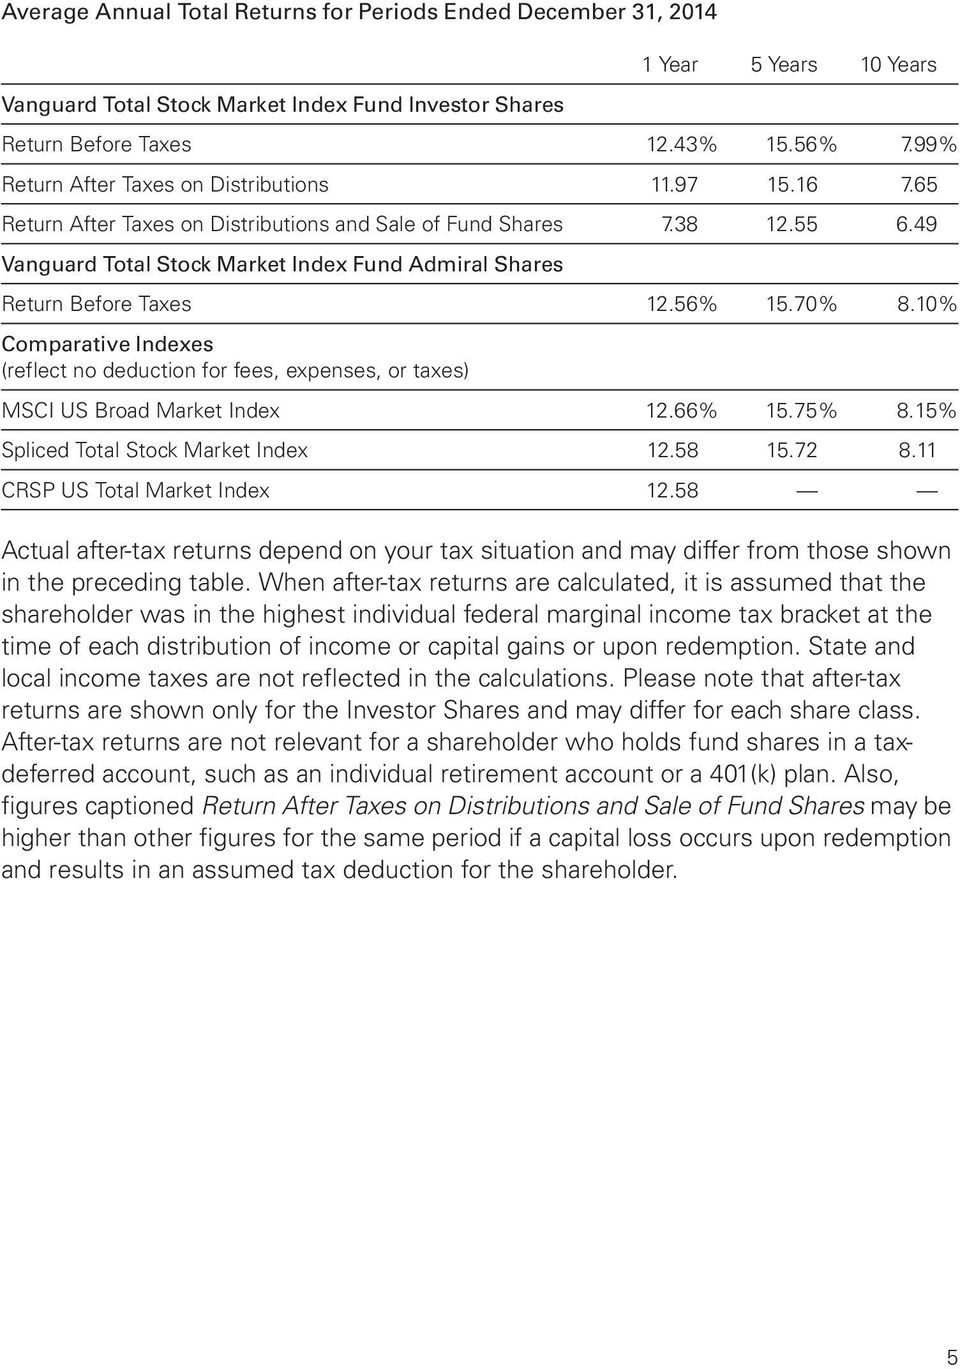 49 Vanguard Total Stock Market Index Fund Admiral Shares Return Before Taxes 12.56% 15.70% 8.10% Comparative Indexes (reflect no deduction for fees, expenses, or taxes) MSCI US Broad Market Index 12.